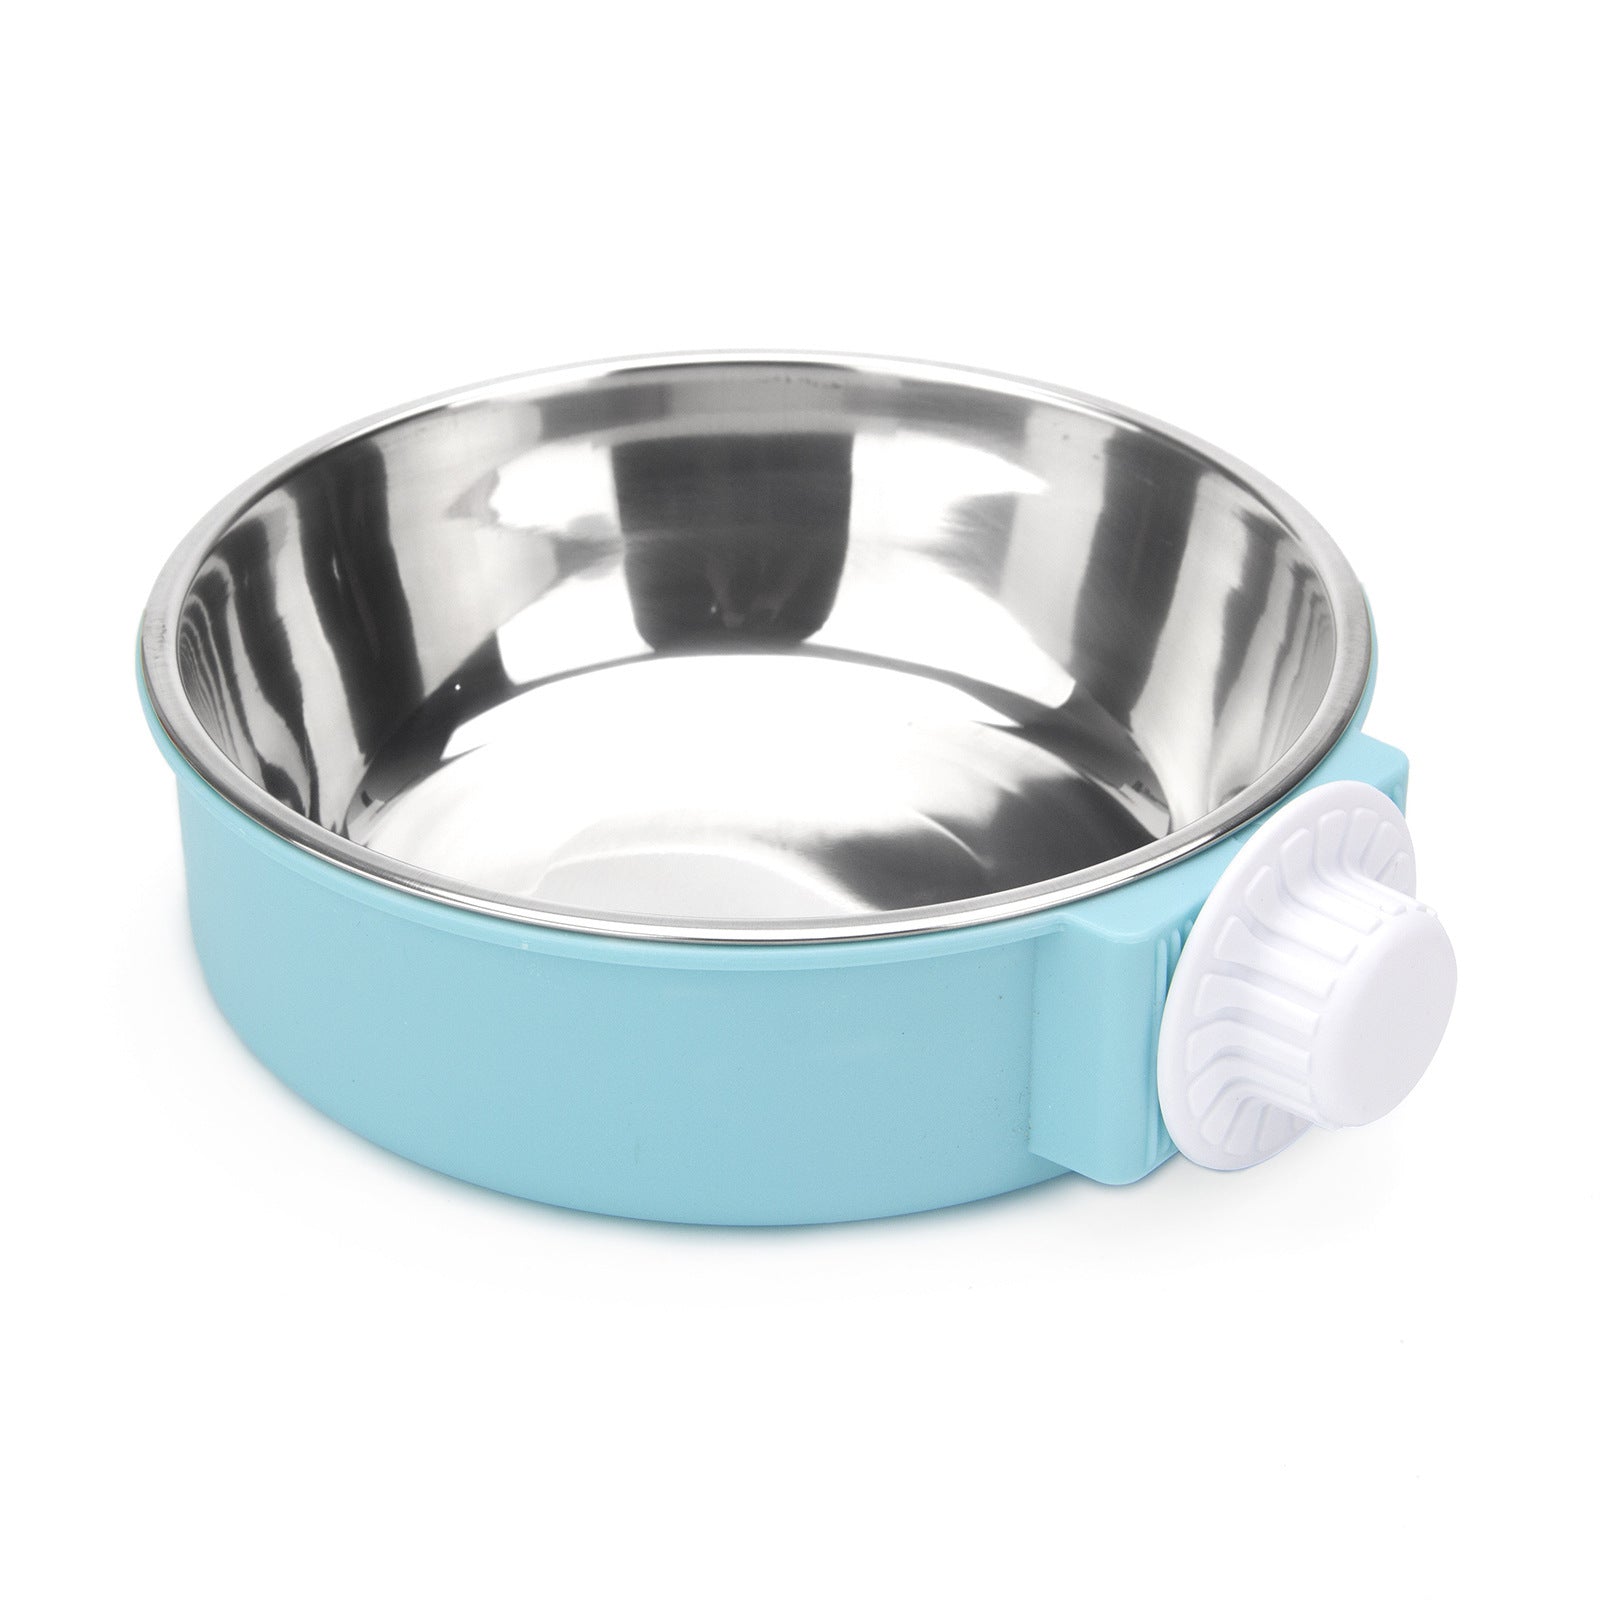 Pet Food & Water Bowl Attachable to Cage Hanging Bowl